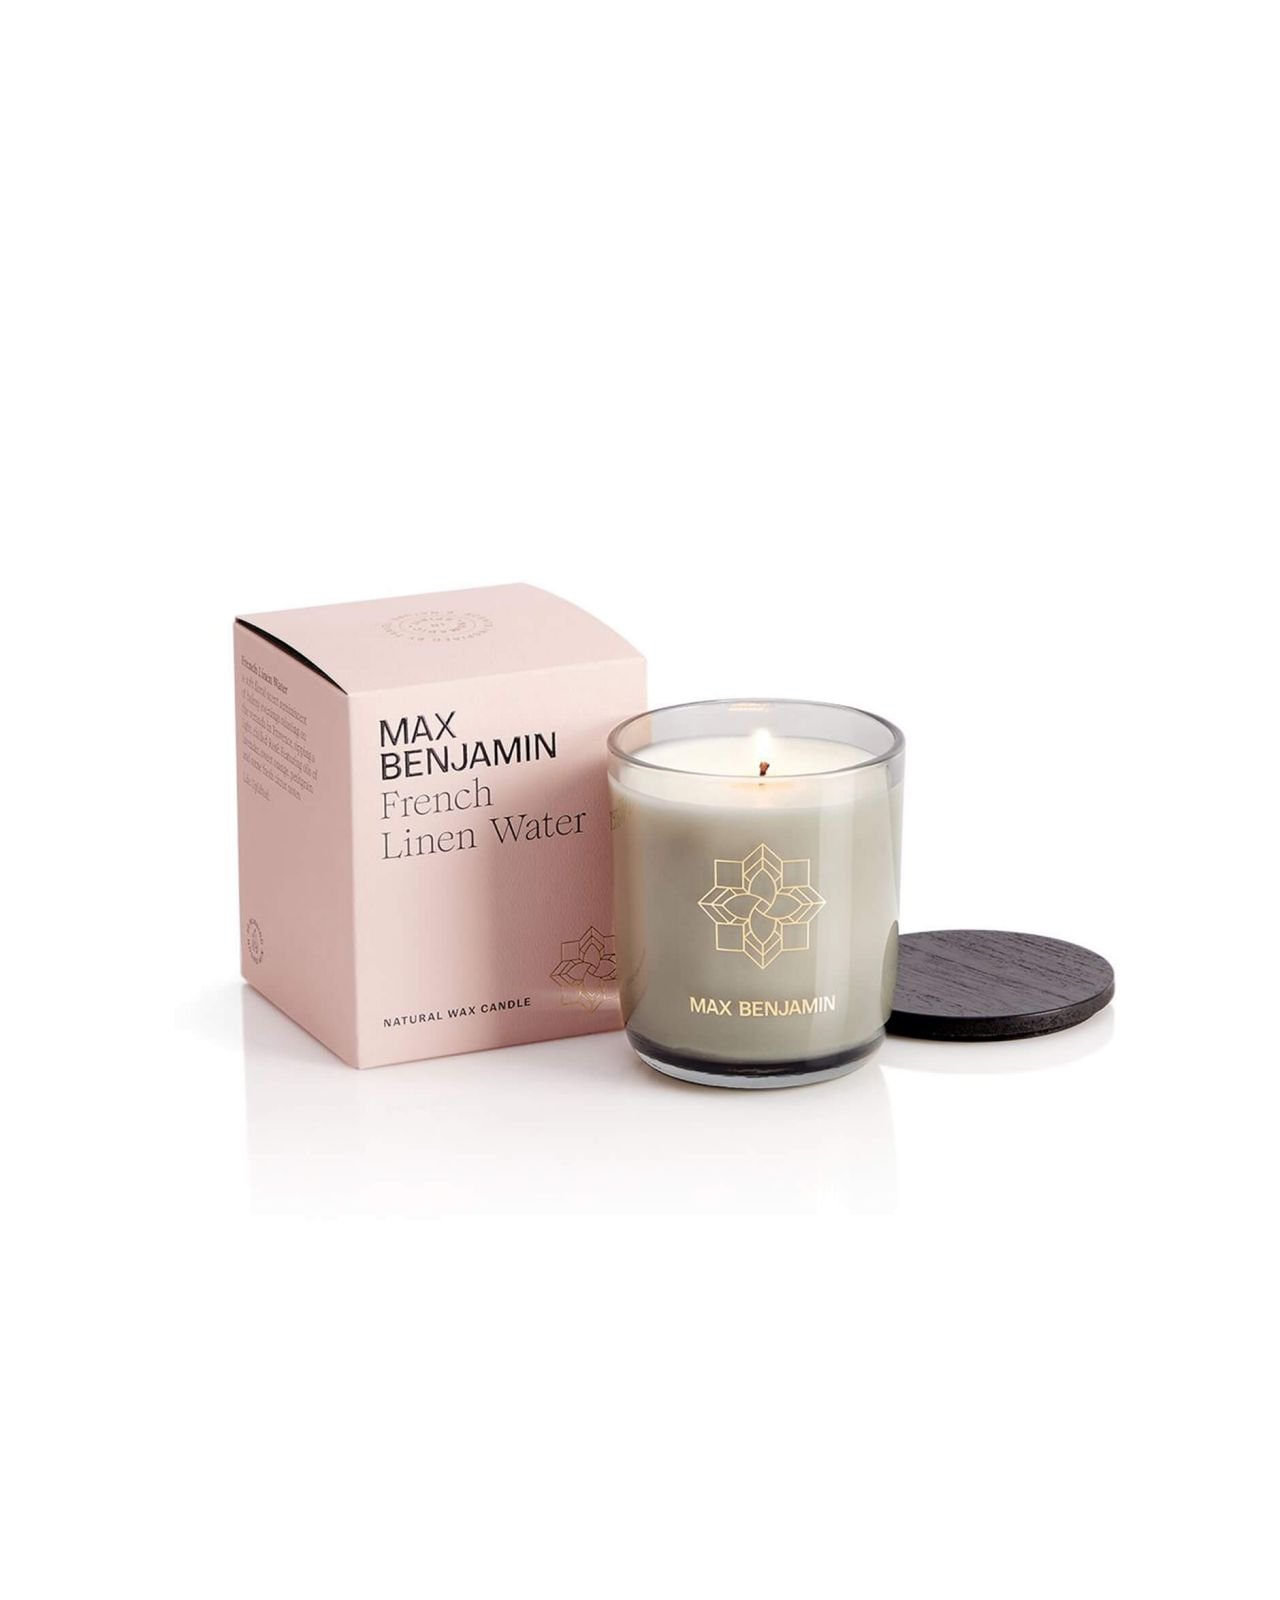 French Linen Water Scented Candle